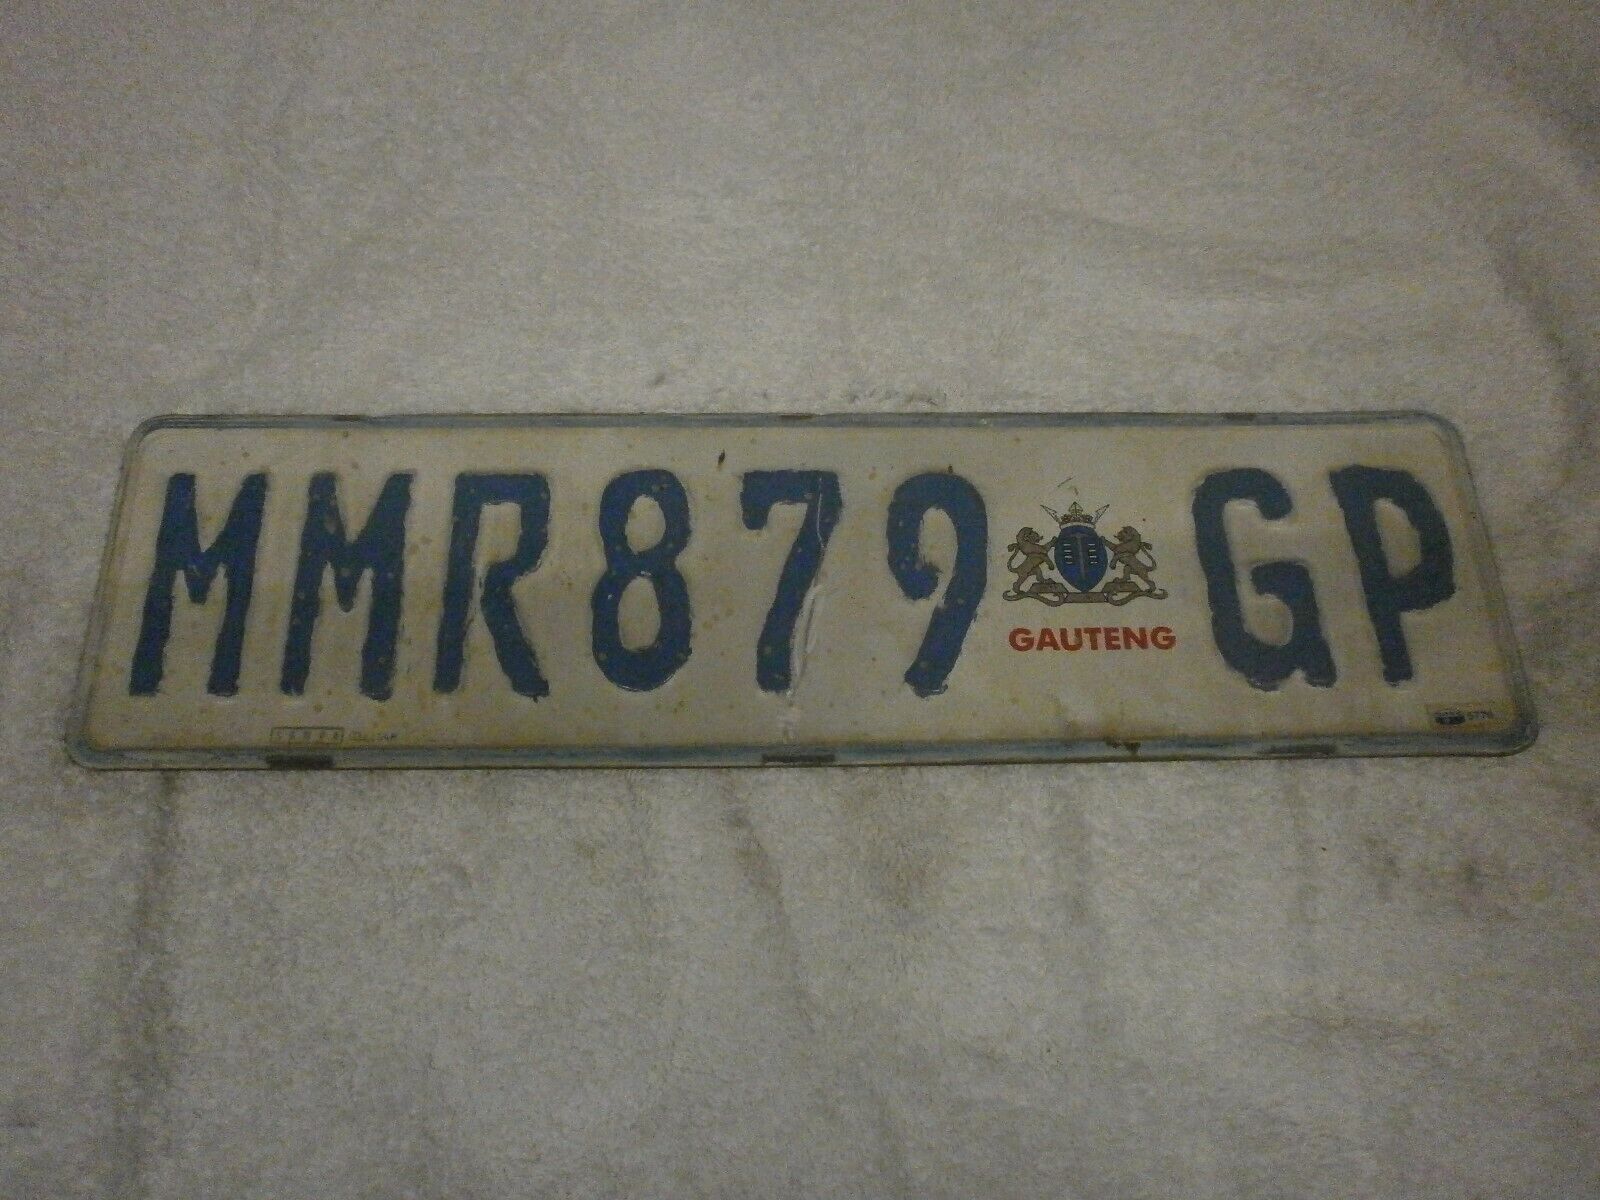 SOUTH AFRICA GAUTENG PROVINCE WITH AREA EMBLEM # MMR 879 GP RARE LICENSE PLATE